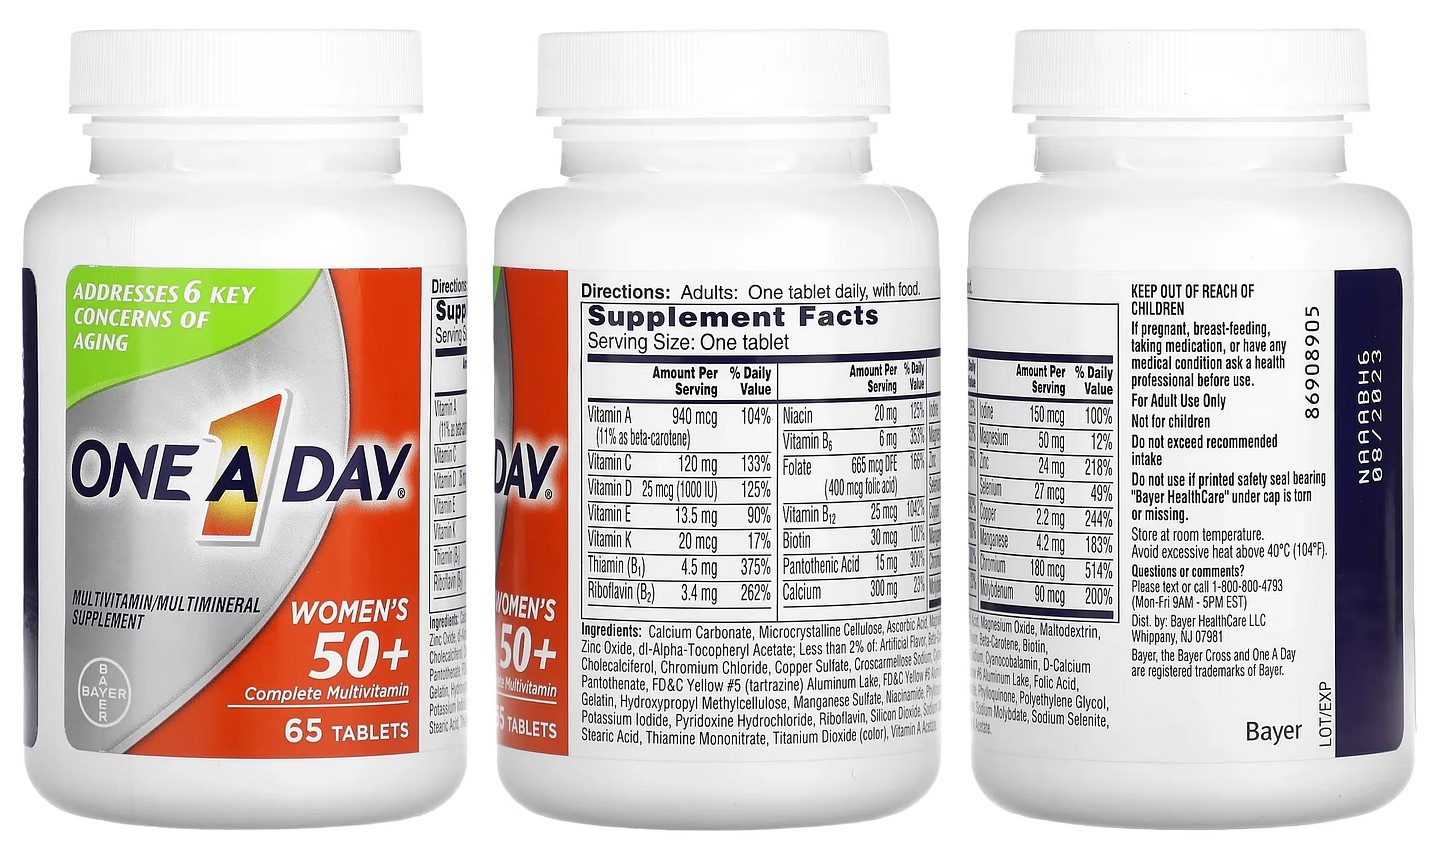 One-A-Day, Women’s 50+ Complete Multivitamin packaging